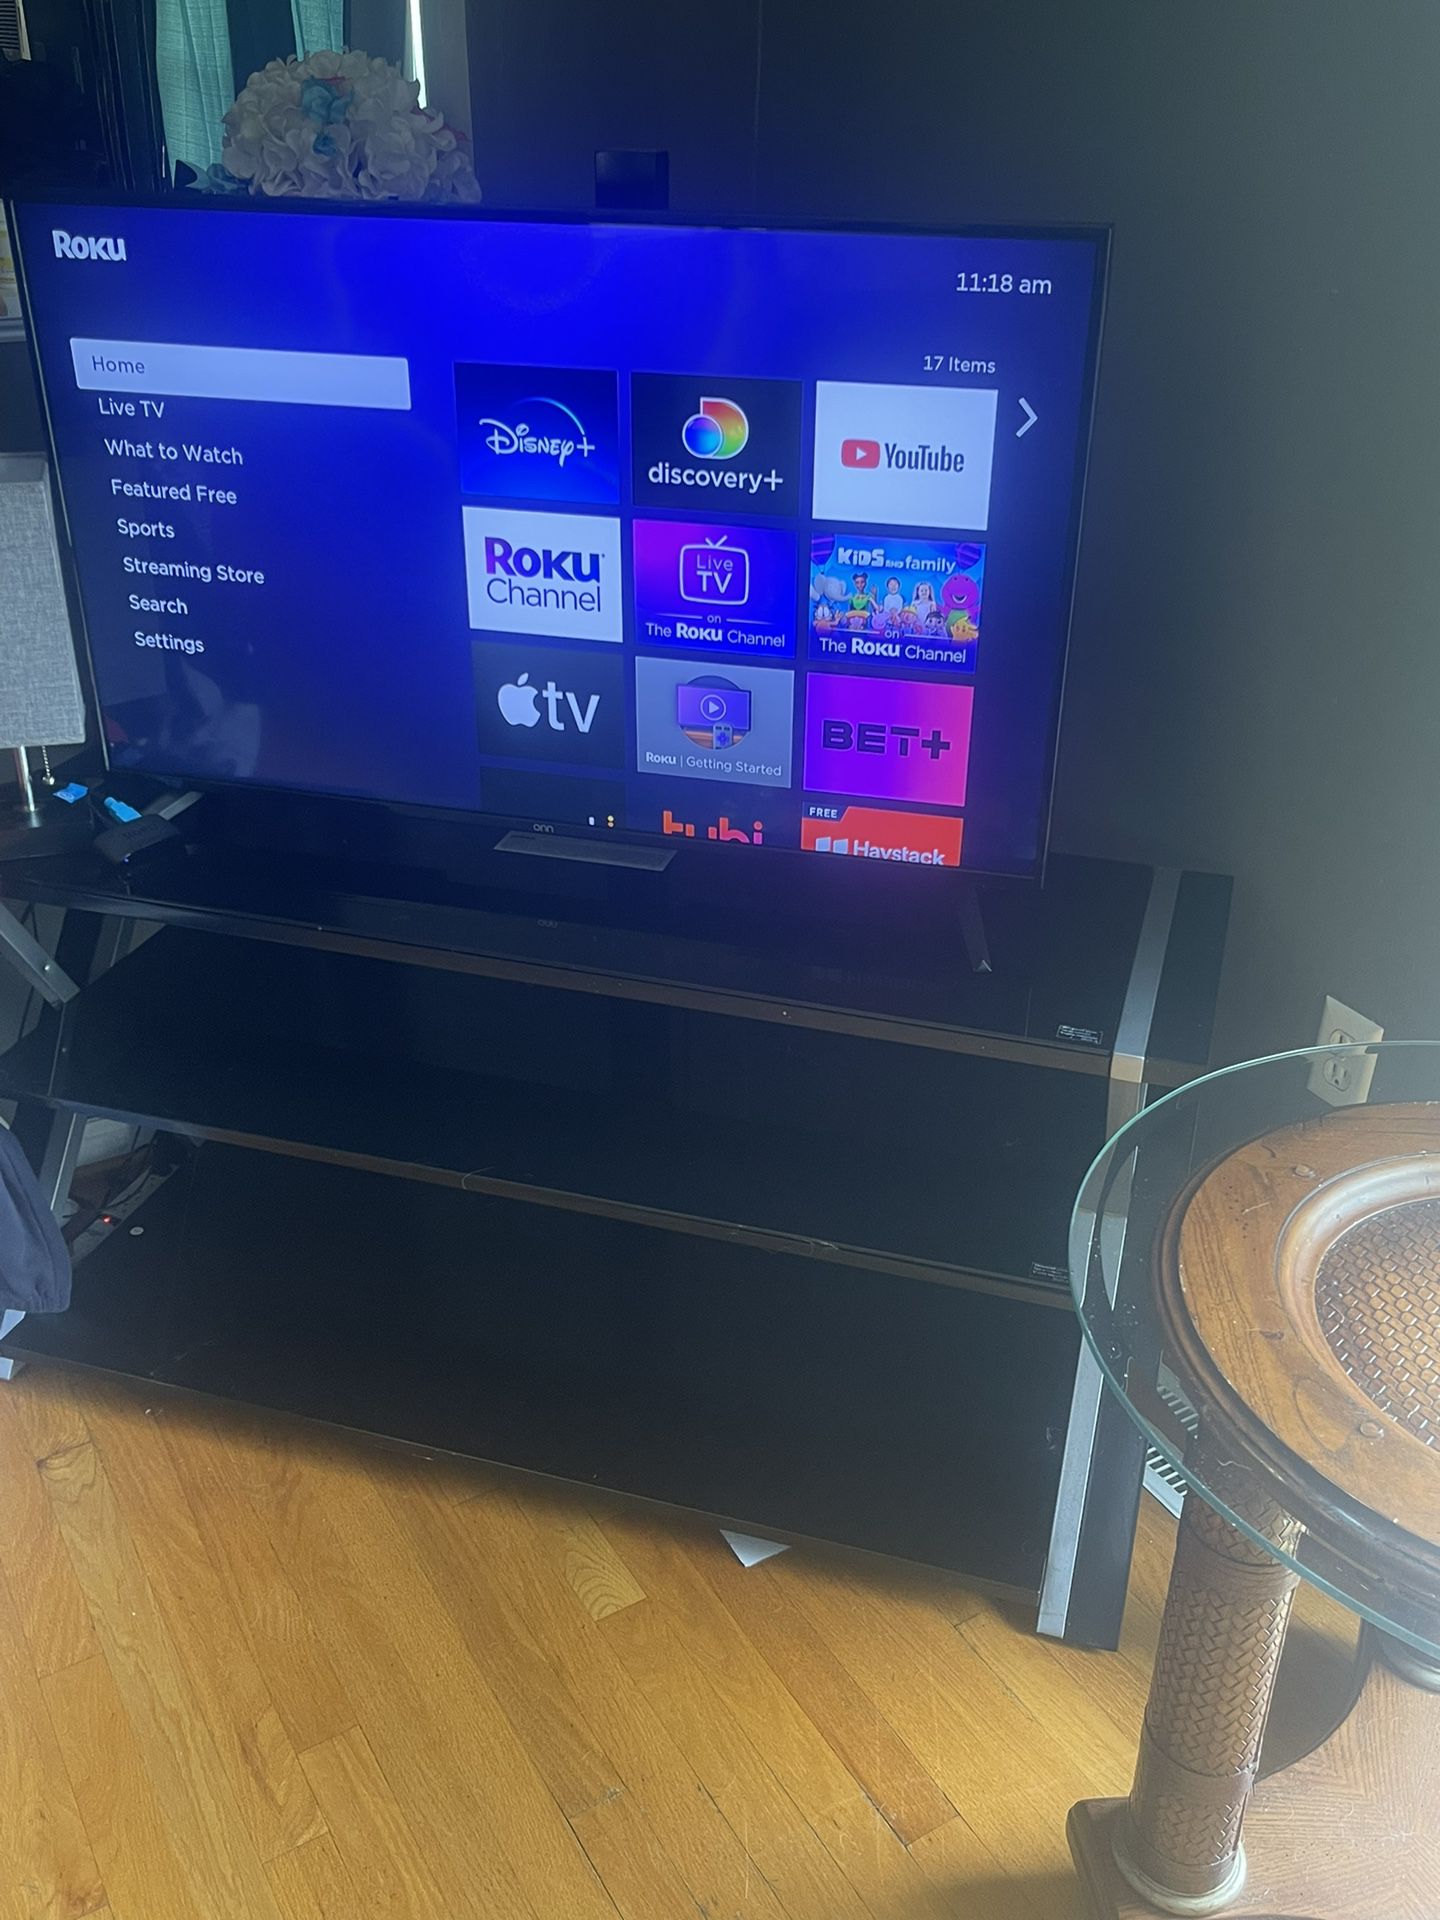 Tv 48 Inch And Stand 